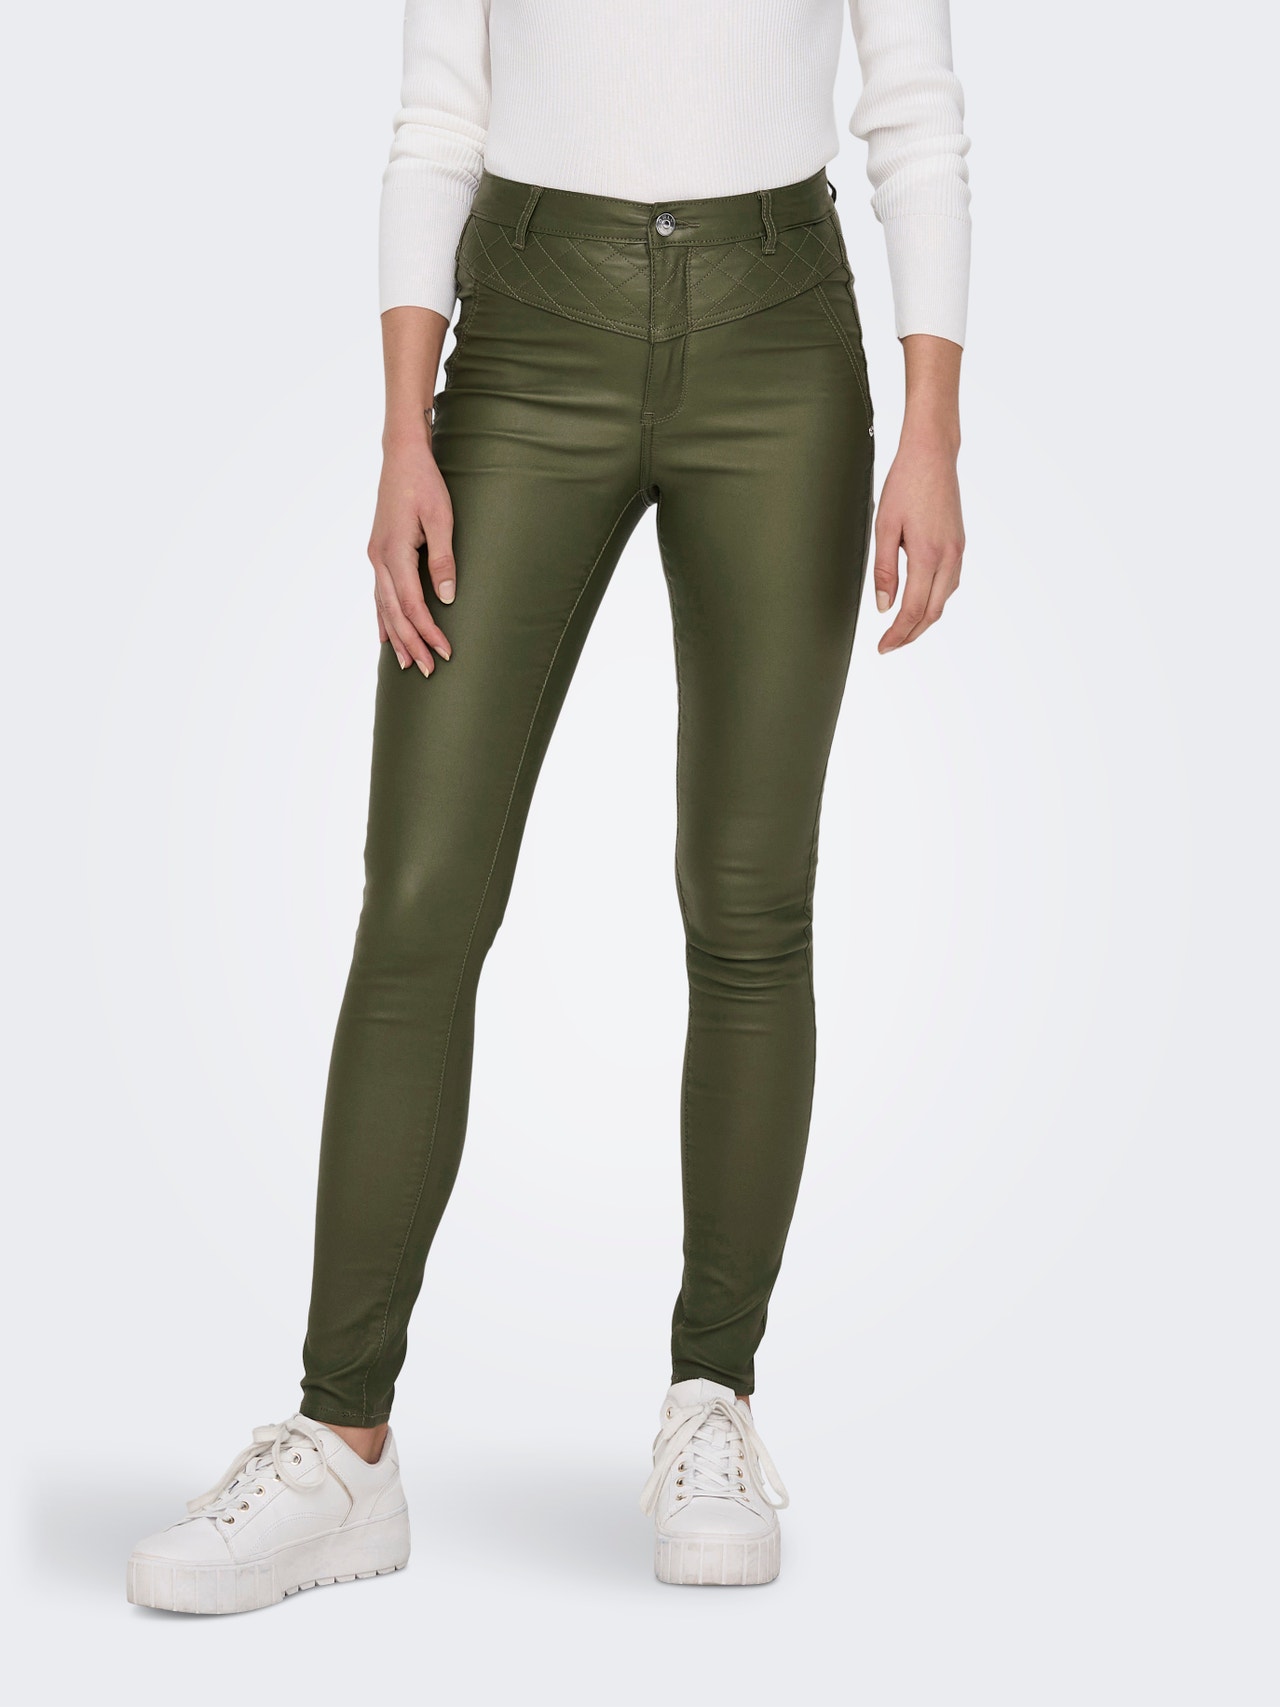 ONLY Skinny trousers with high waist -Kalamata - 15271914